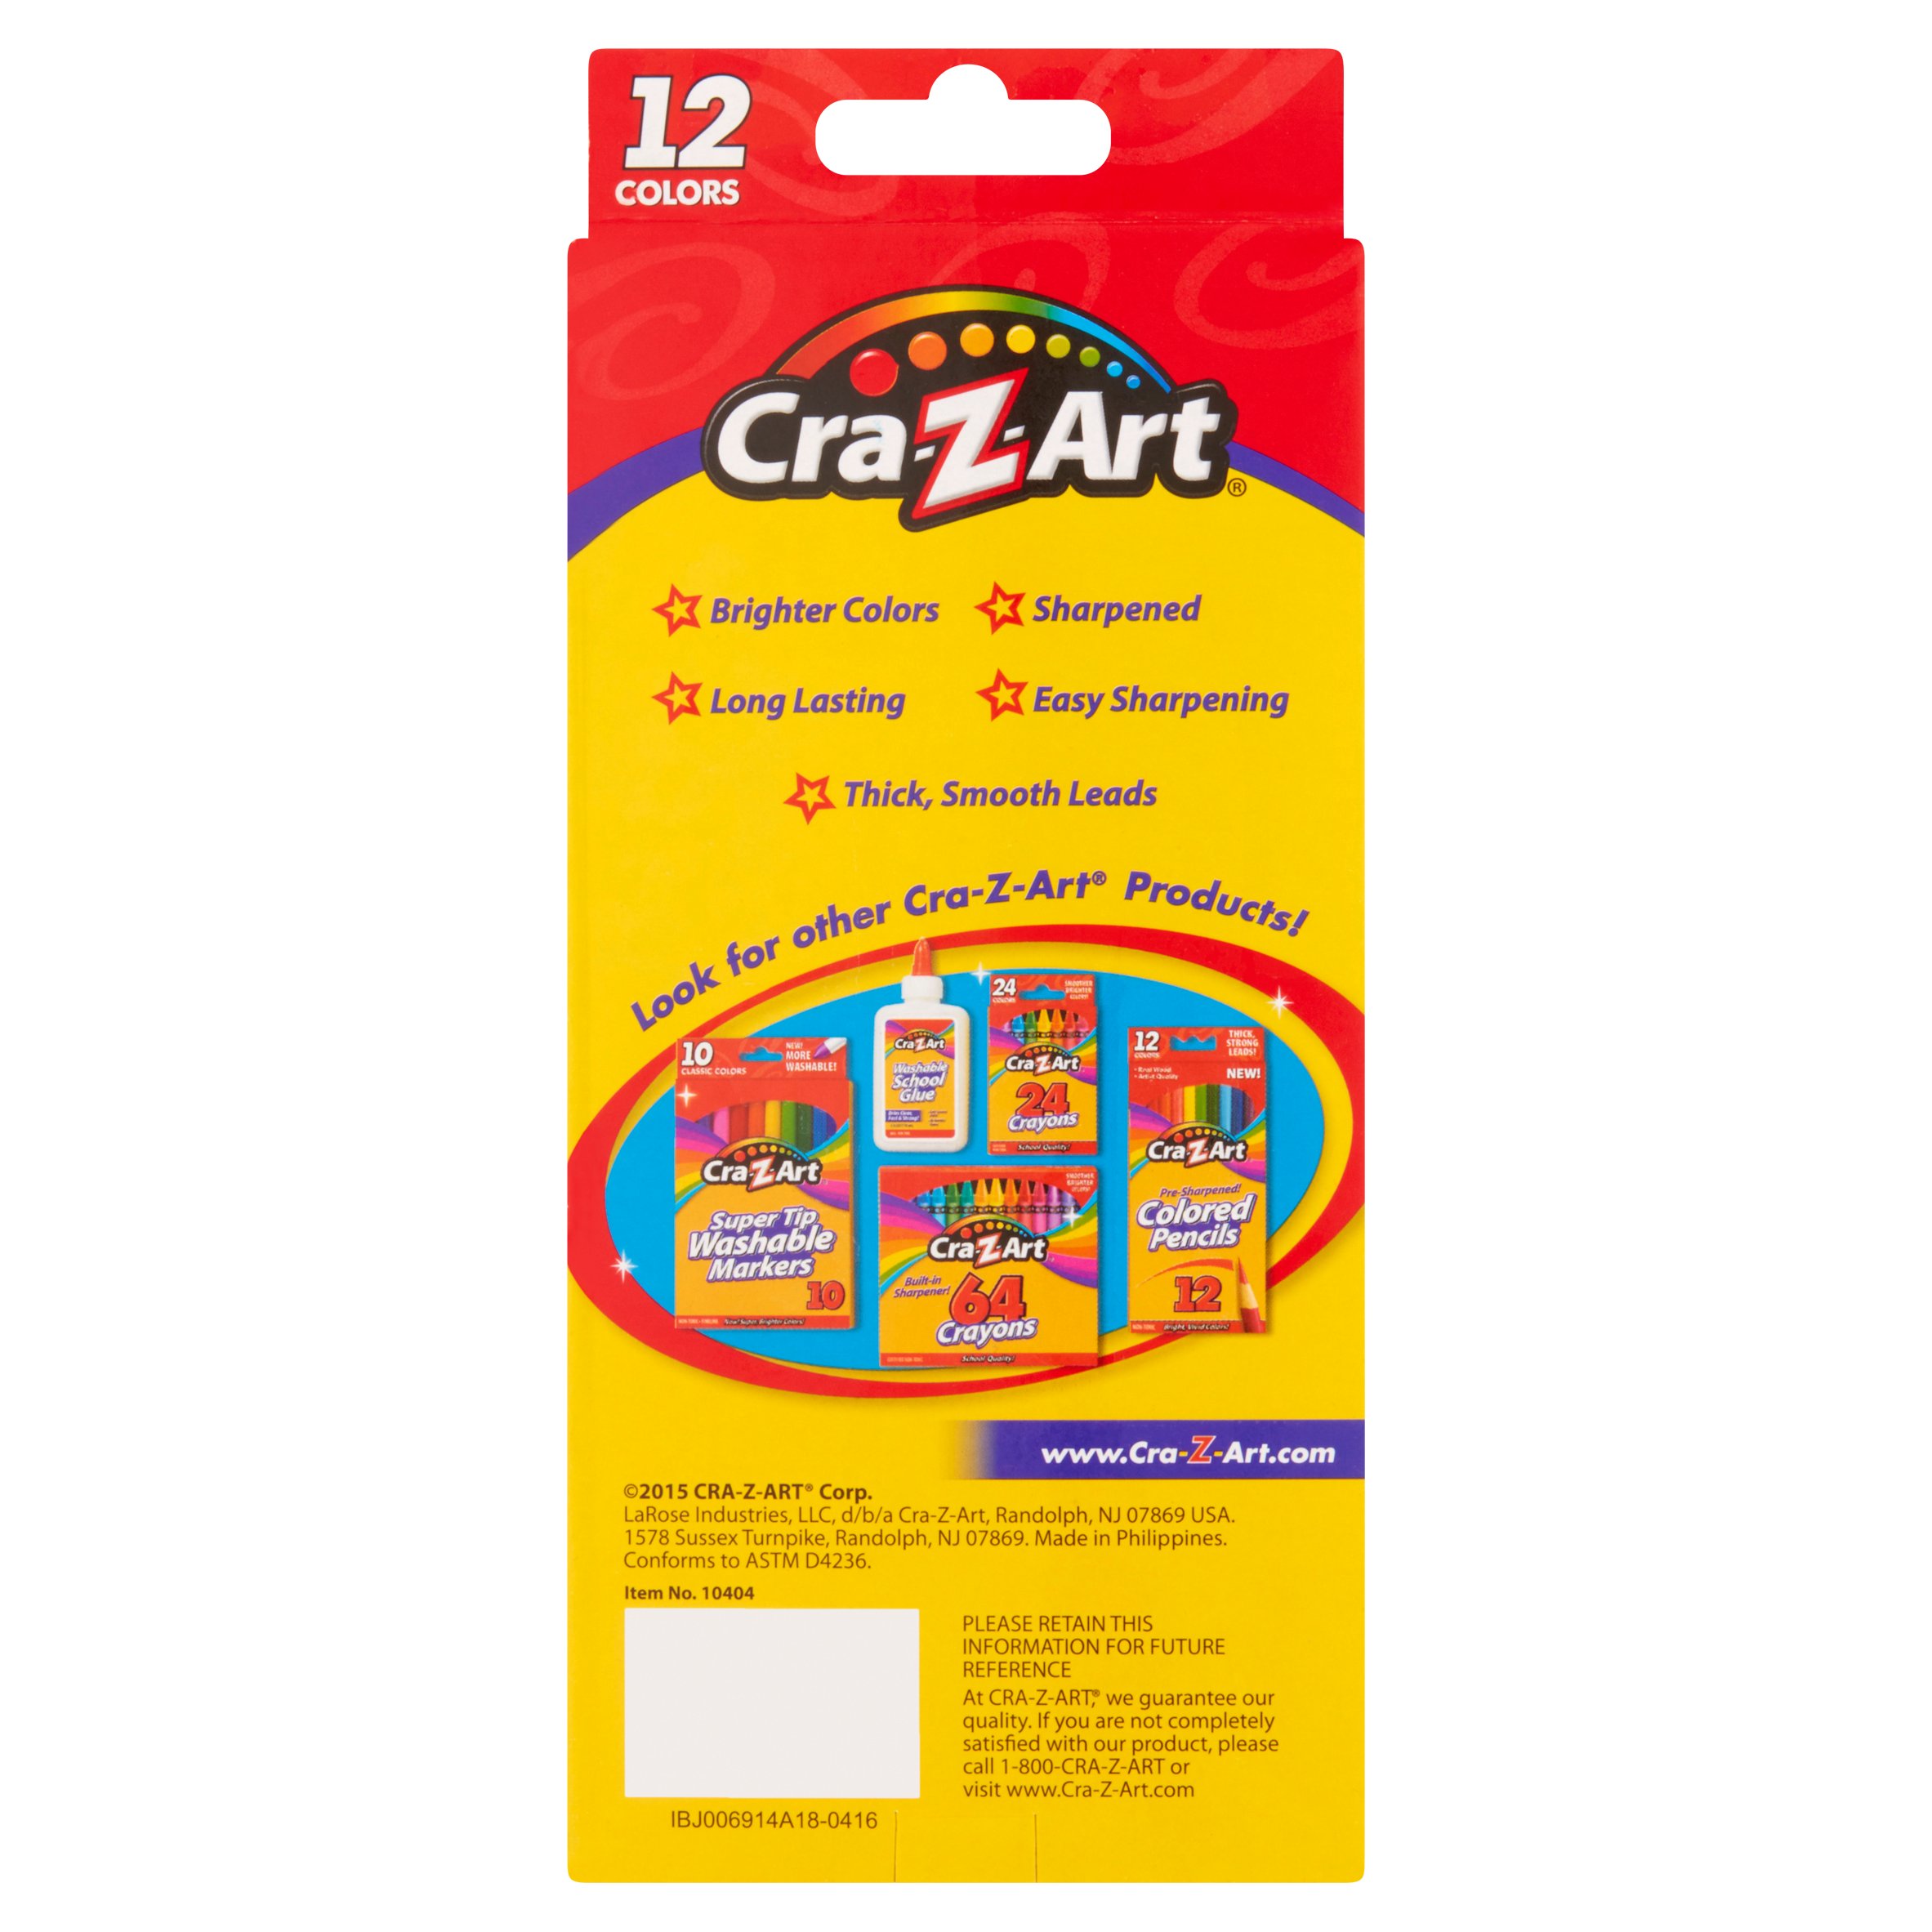 Cra-Z-Art Colored Pencils, 12 Count, Beginner Child to Adult, Back to School Supplies - image 5 of 11